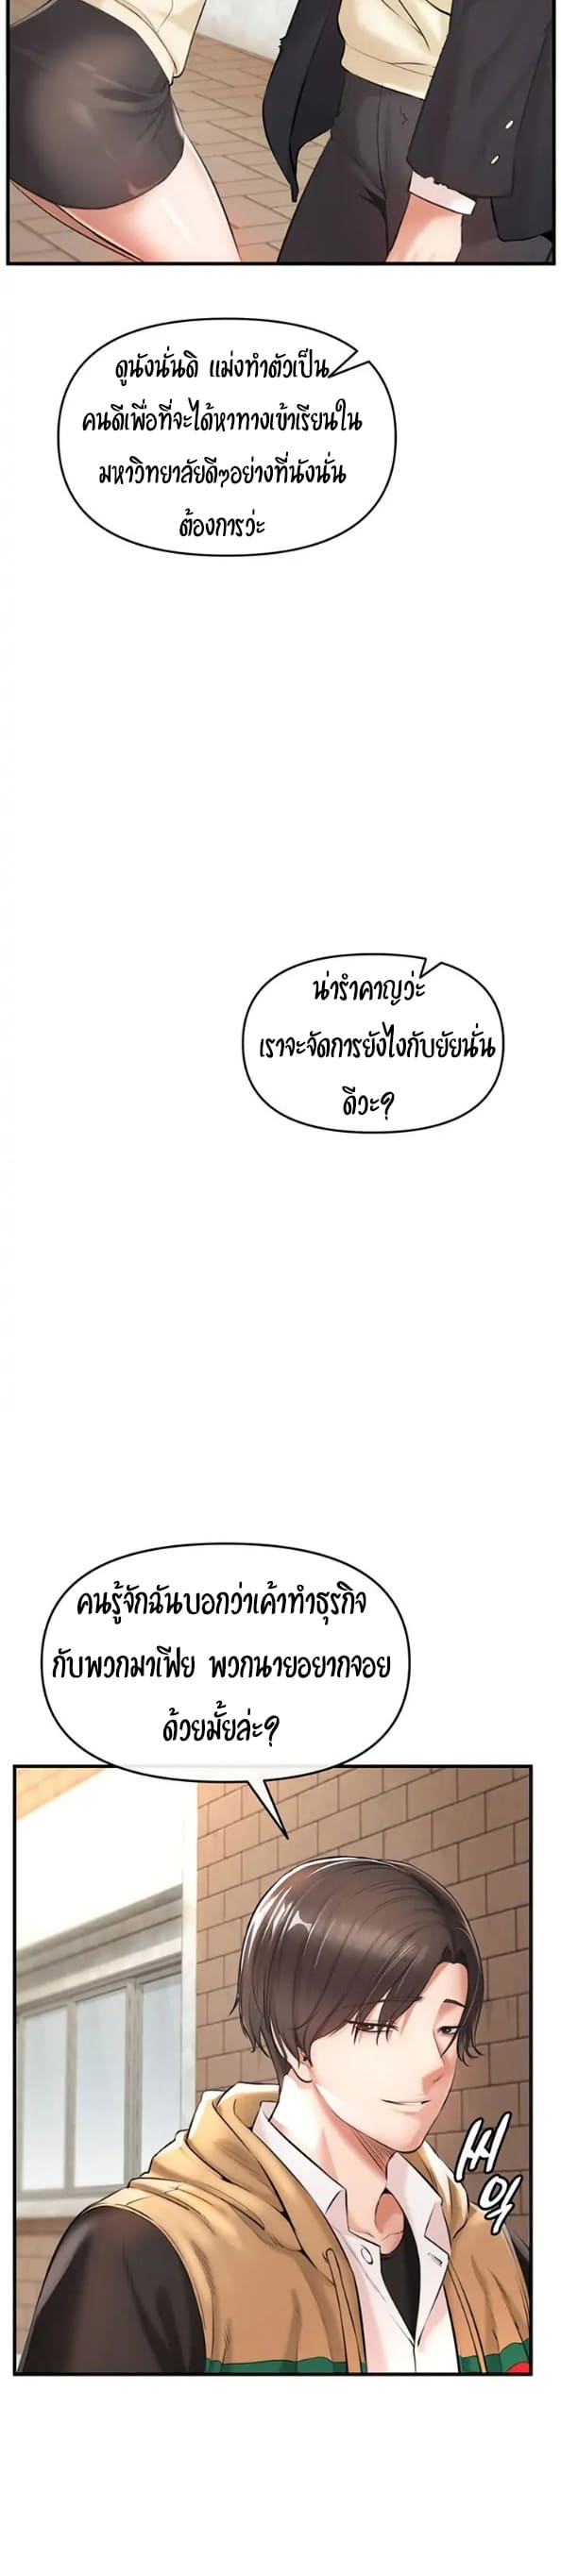 The Real Deal ตอนที่ 1 ภาพ 25